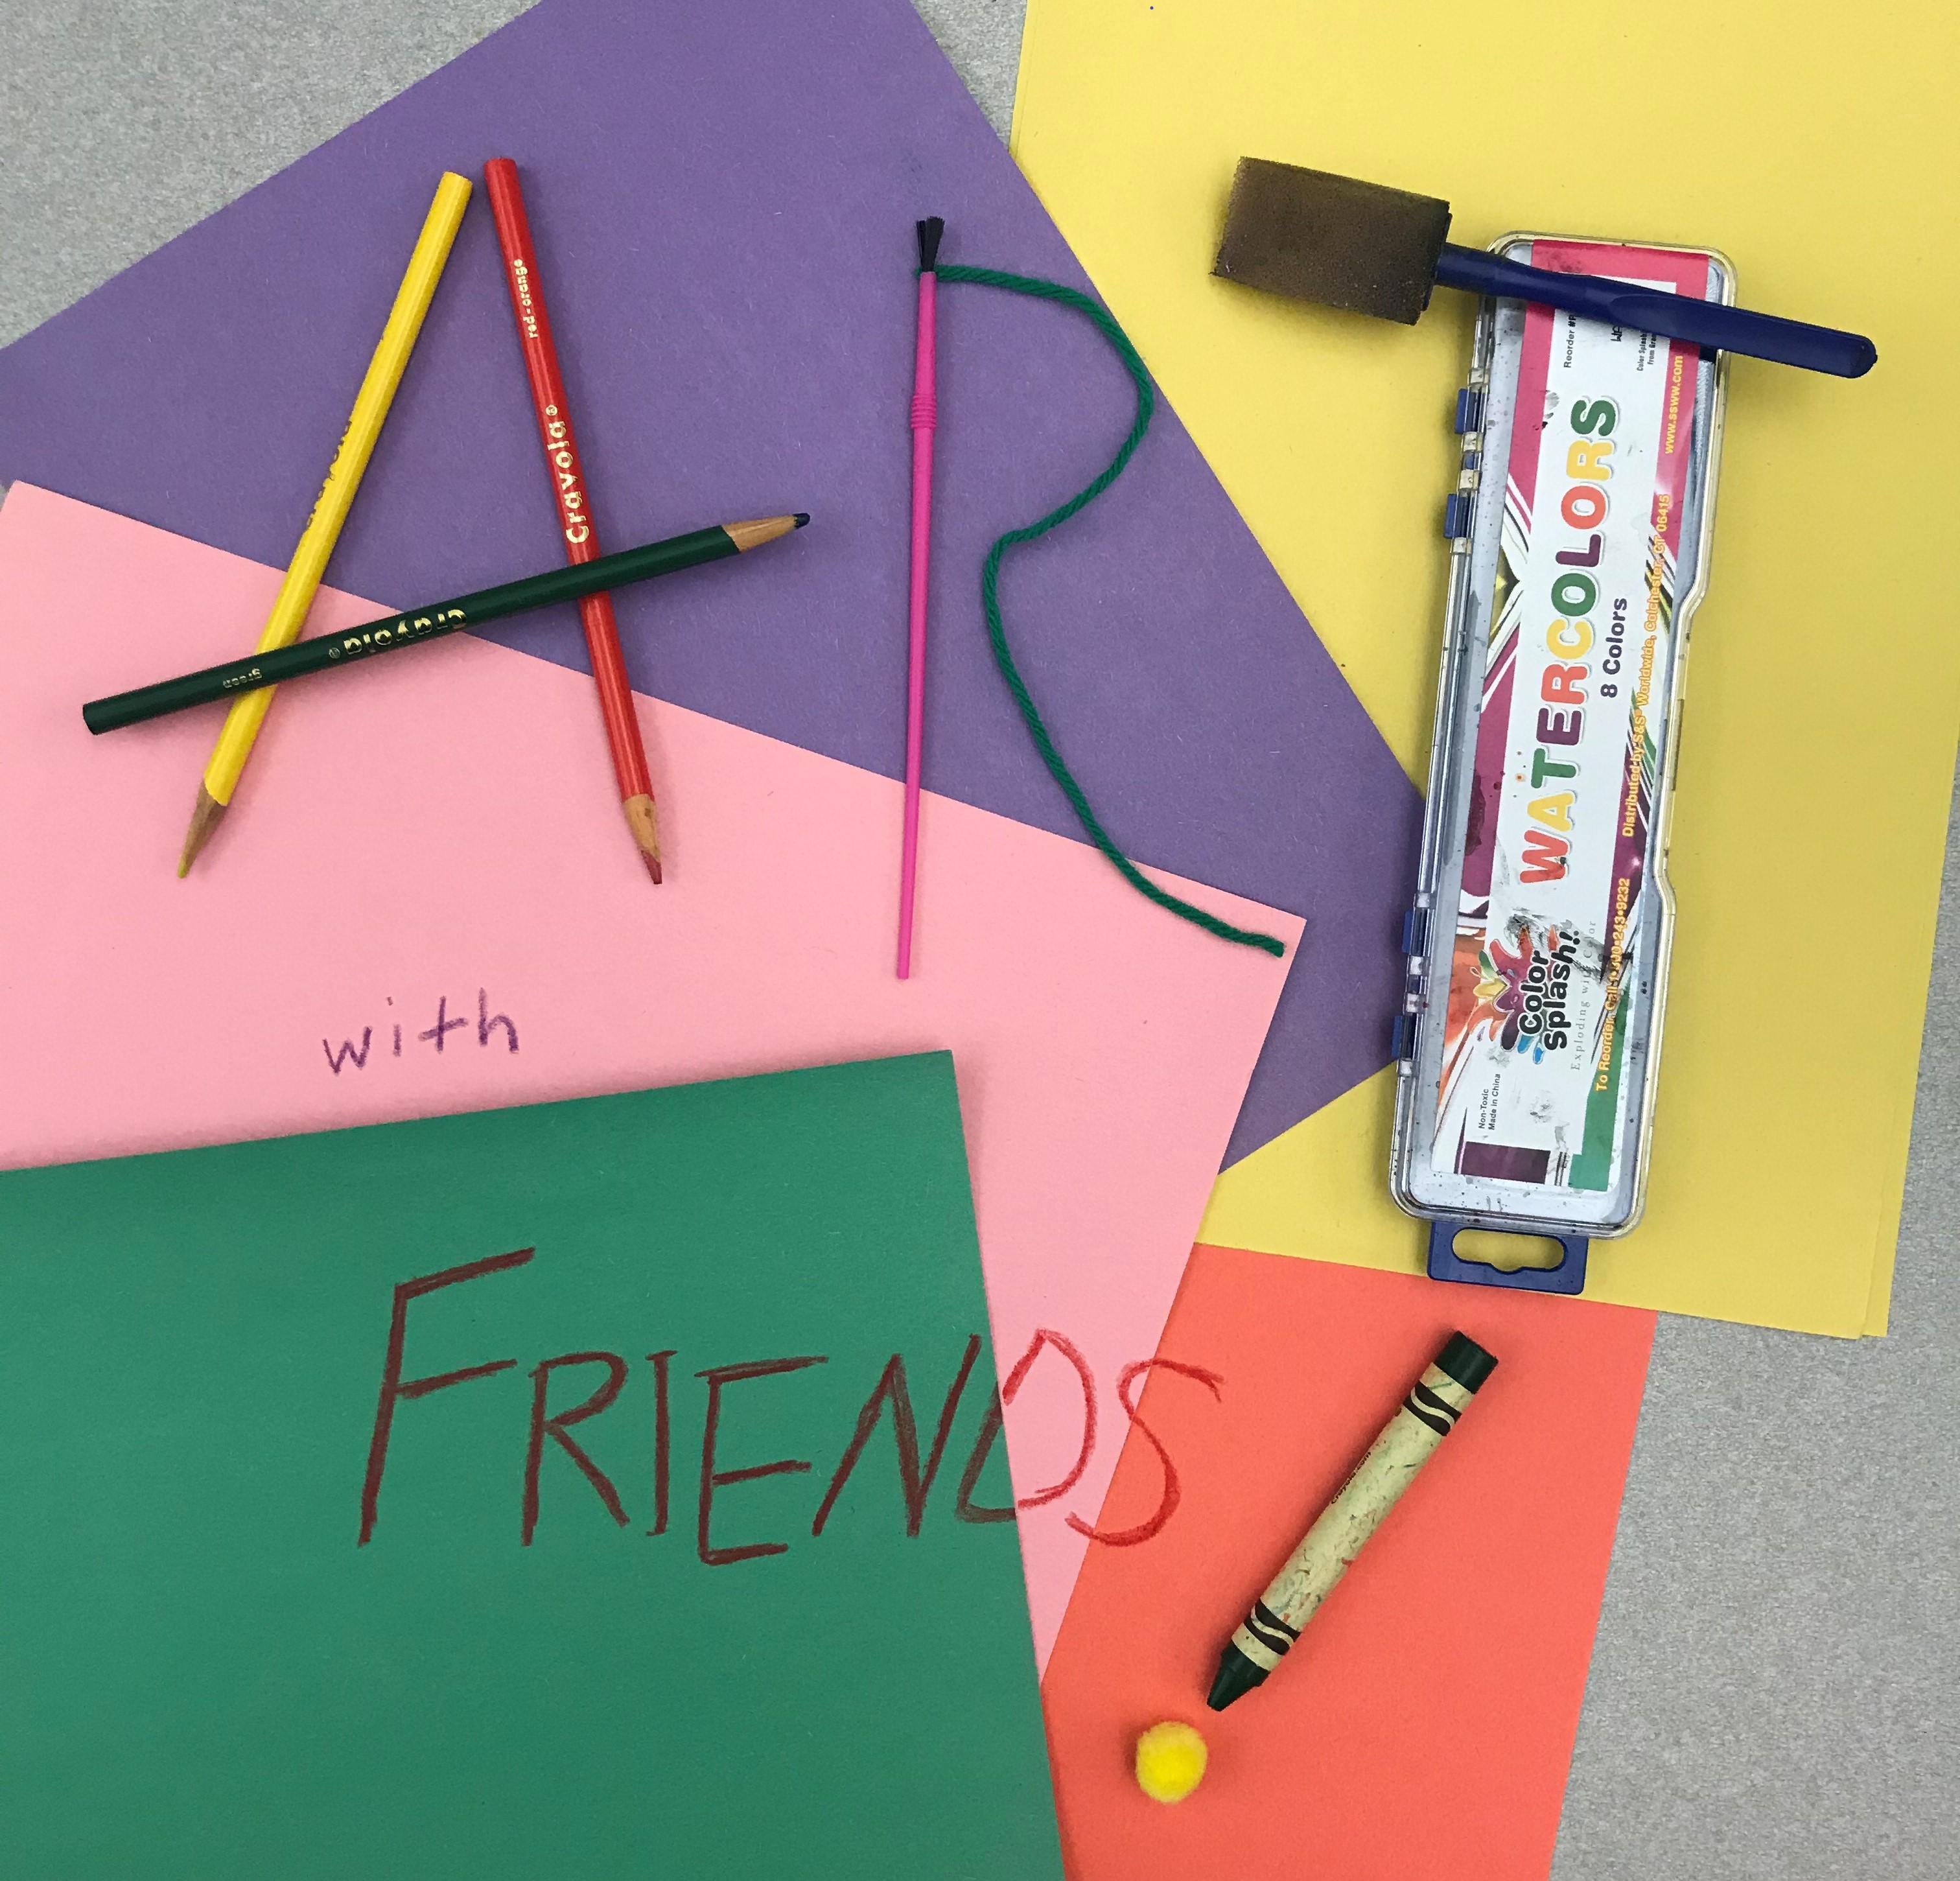 image of craft items that spell "Art with Friends"